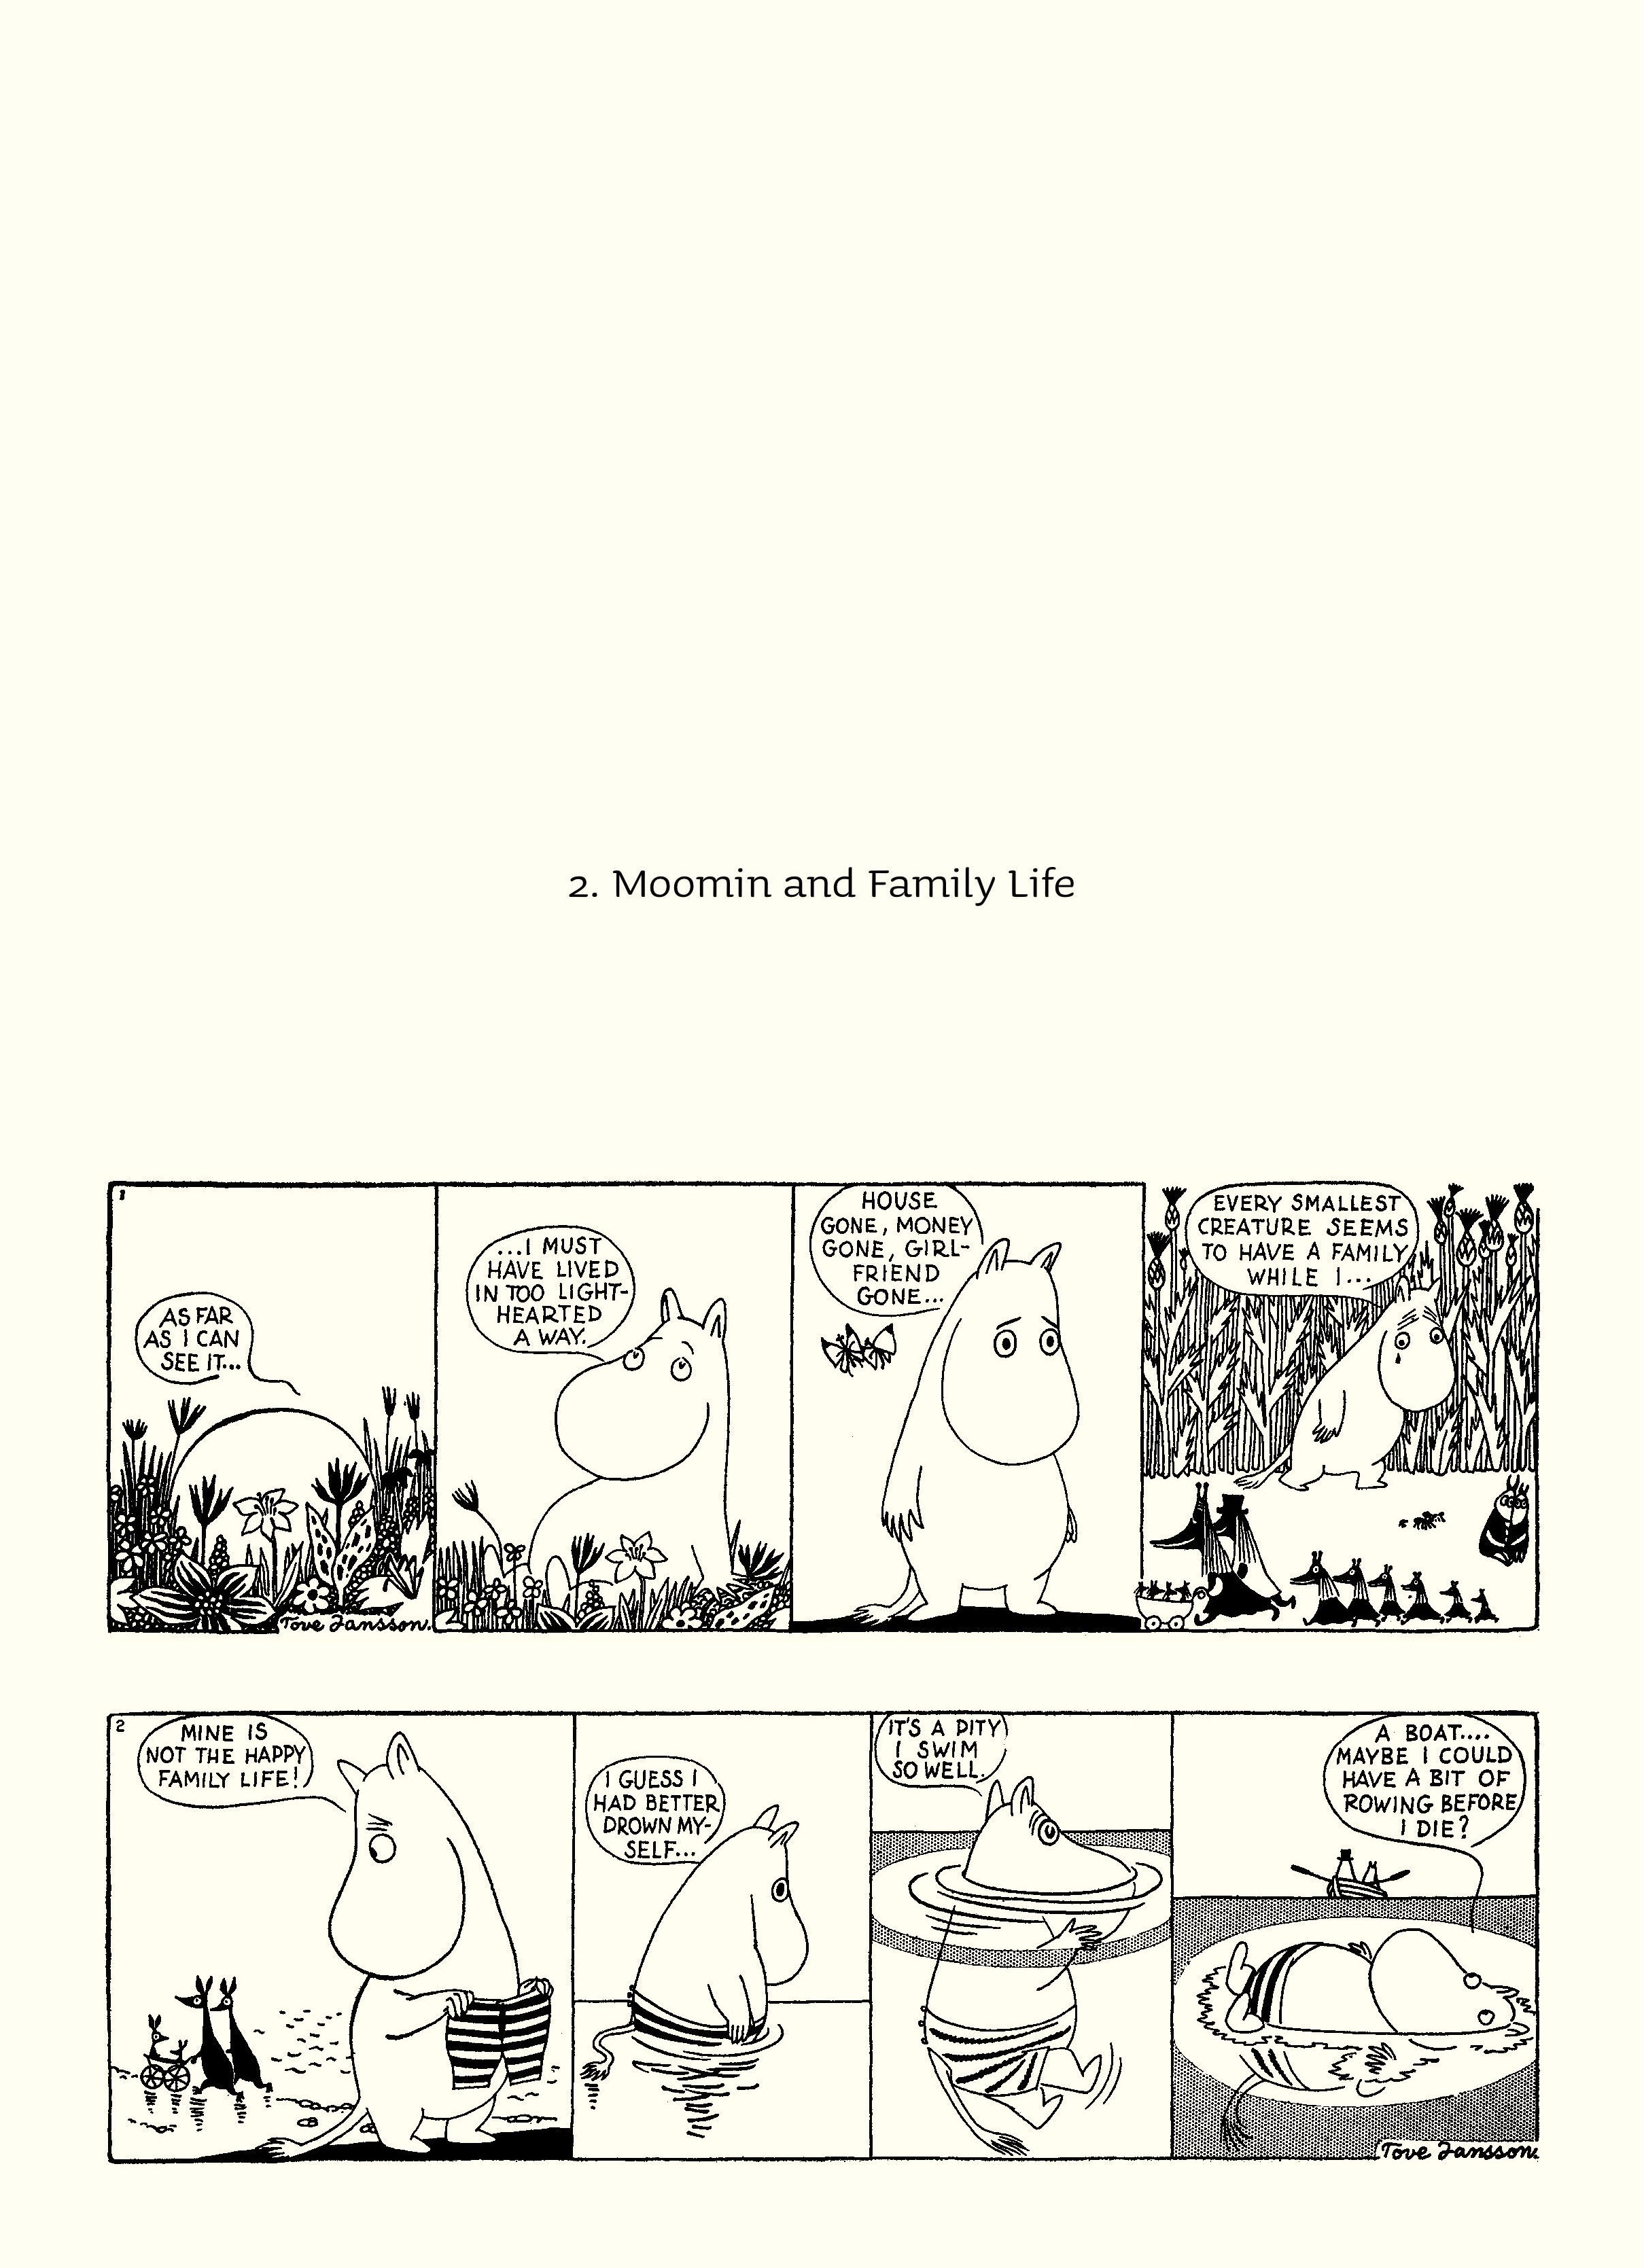 Read online Moomin: The Complete Tove Jansson Comic Strip comic -  Issue # TPB 1 - 30